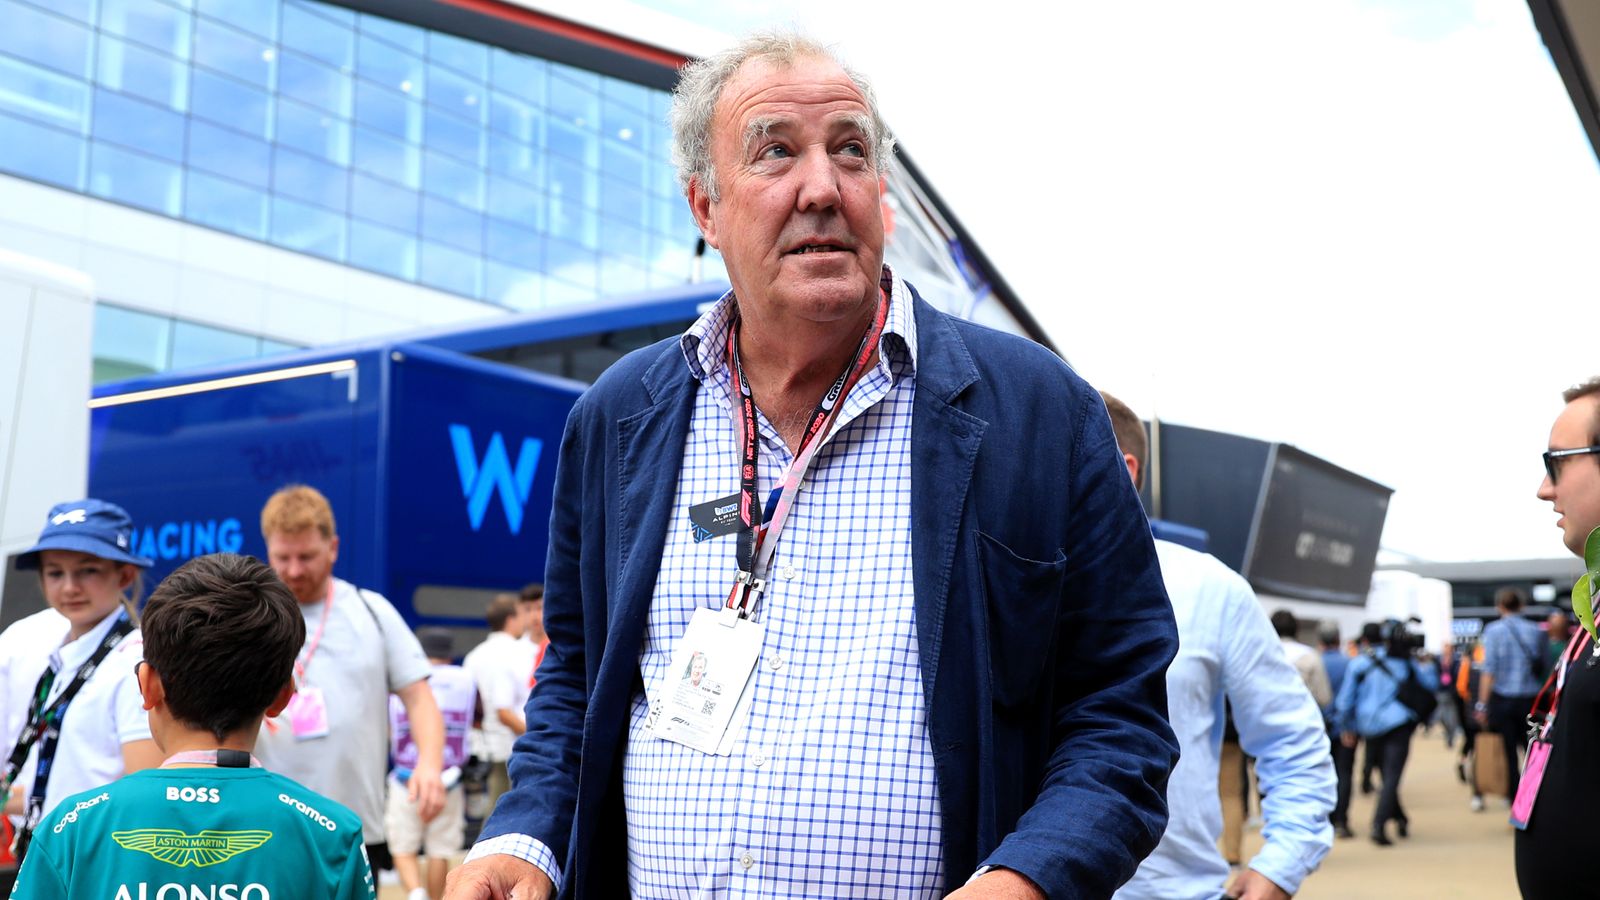 Jeremy Clarkson: Former Top Gear presenter teams up with Ben Pauling in new racing syndicate